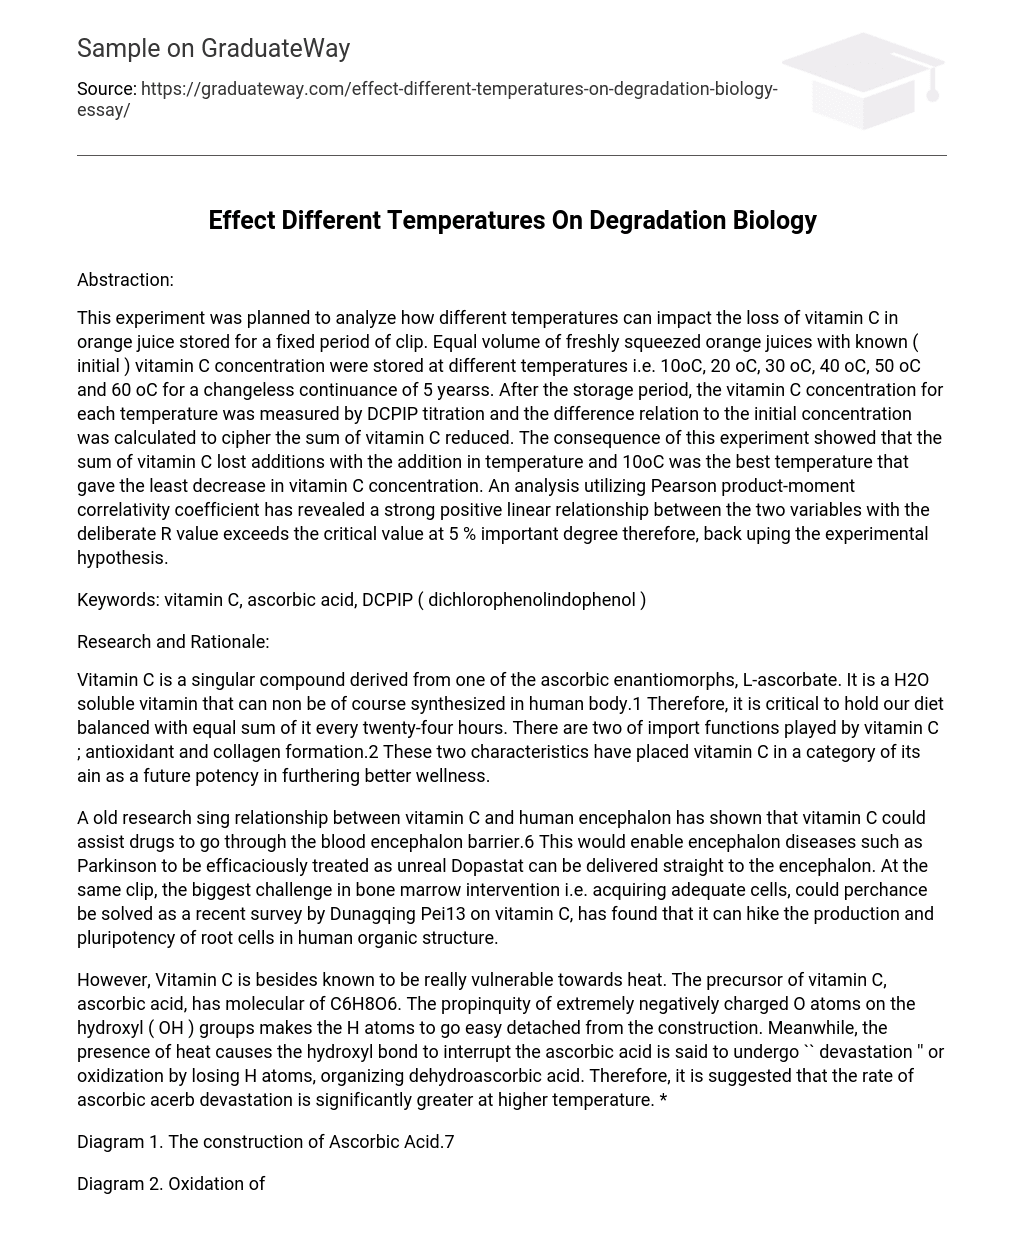 Effect Different Temperatures On Degradation Biology